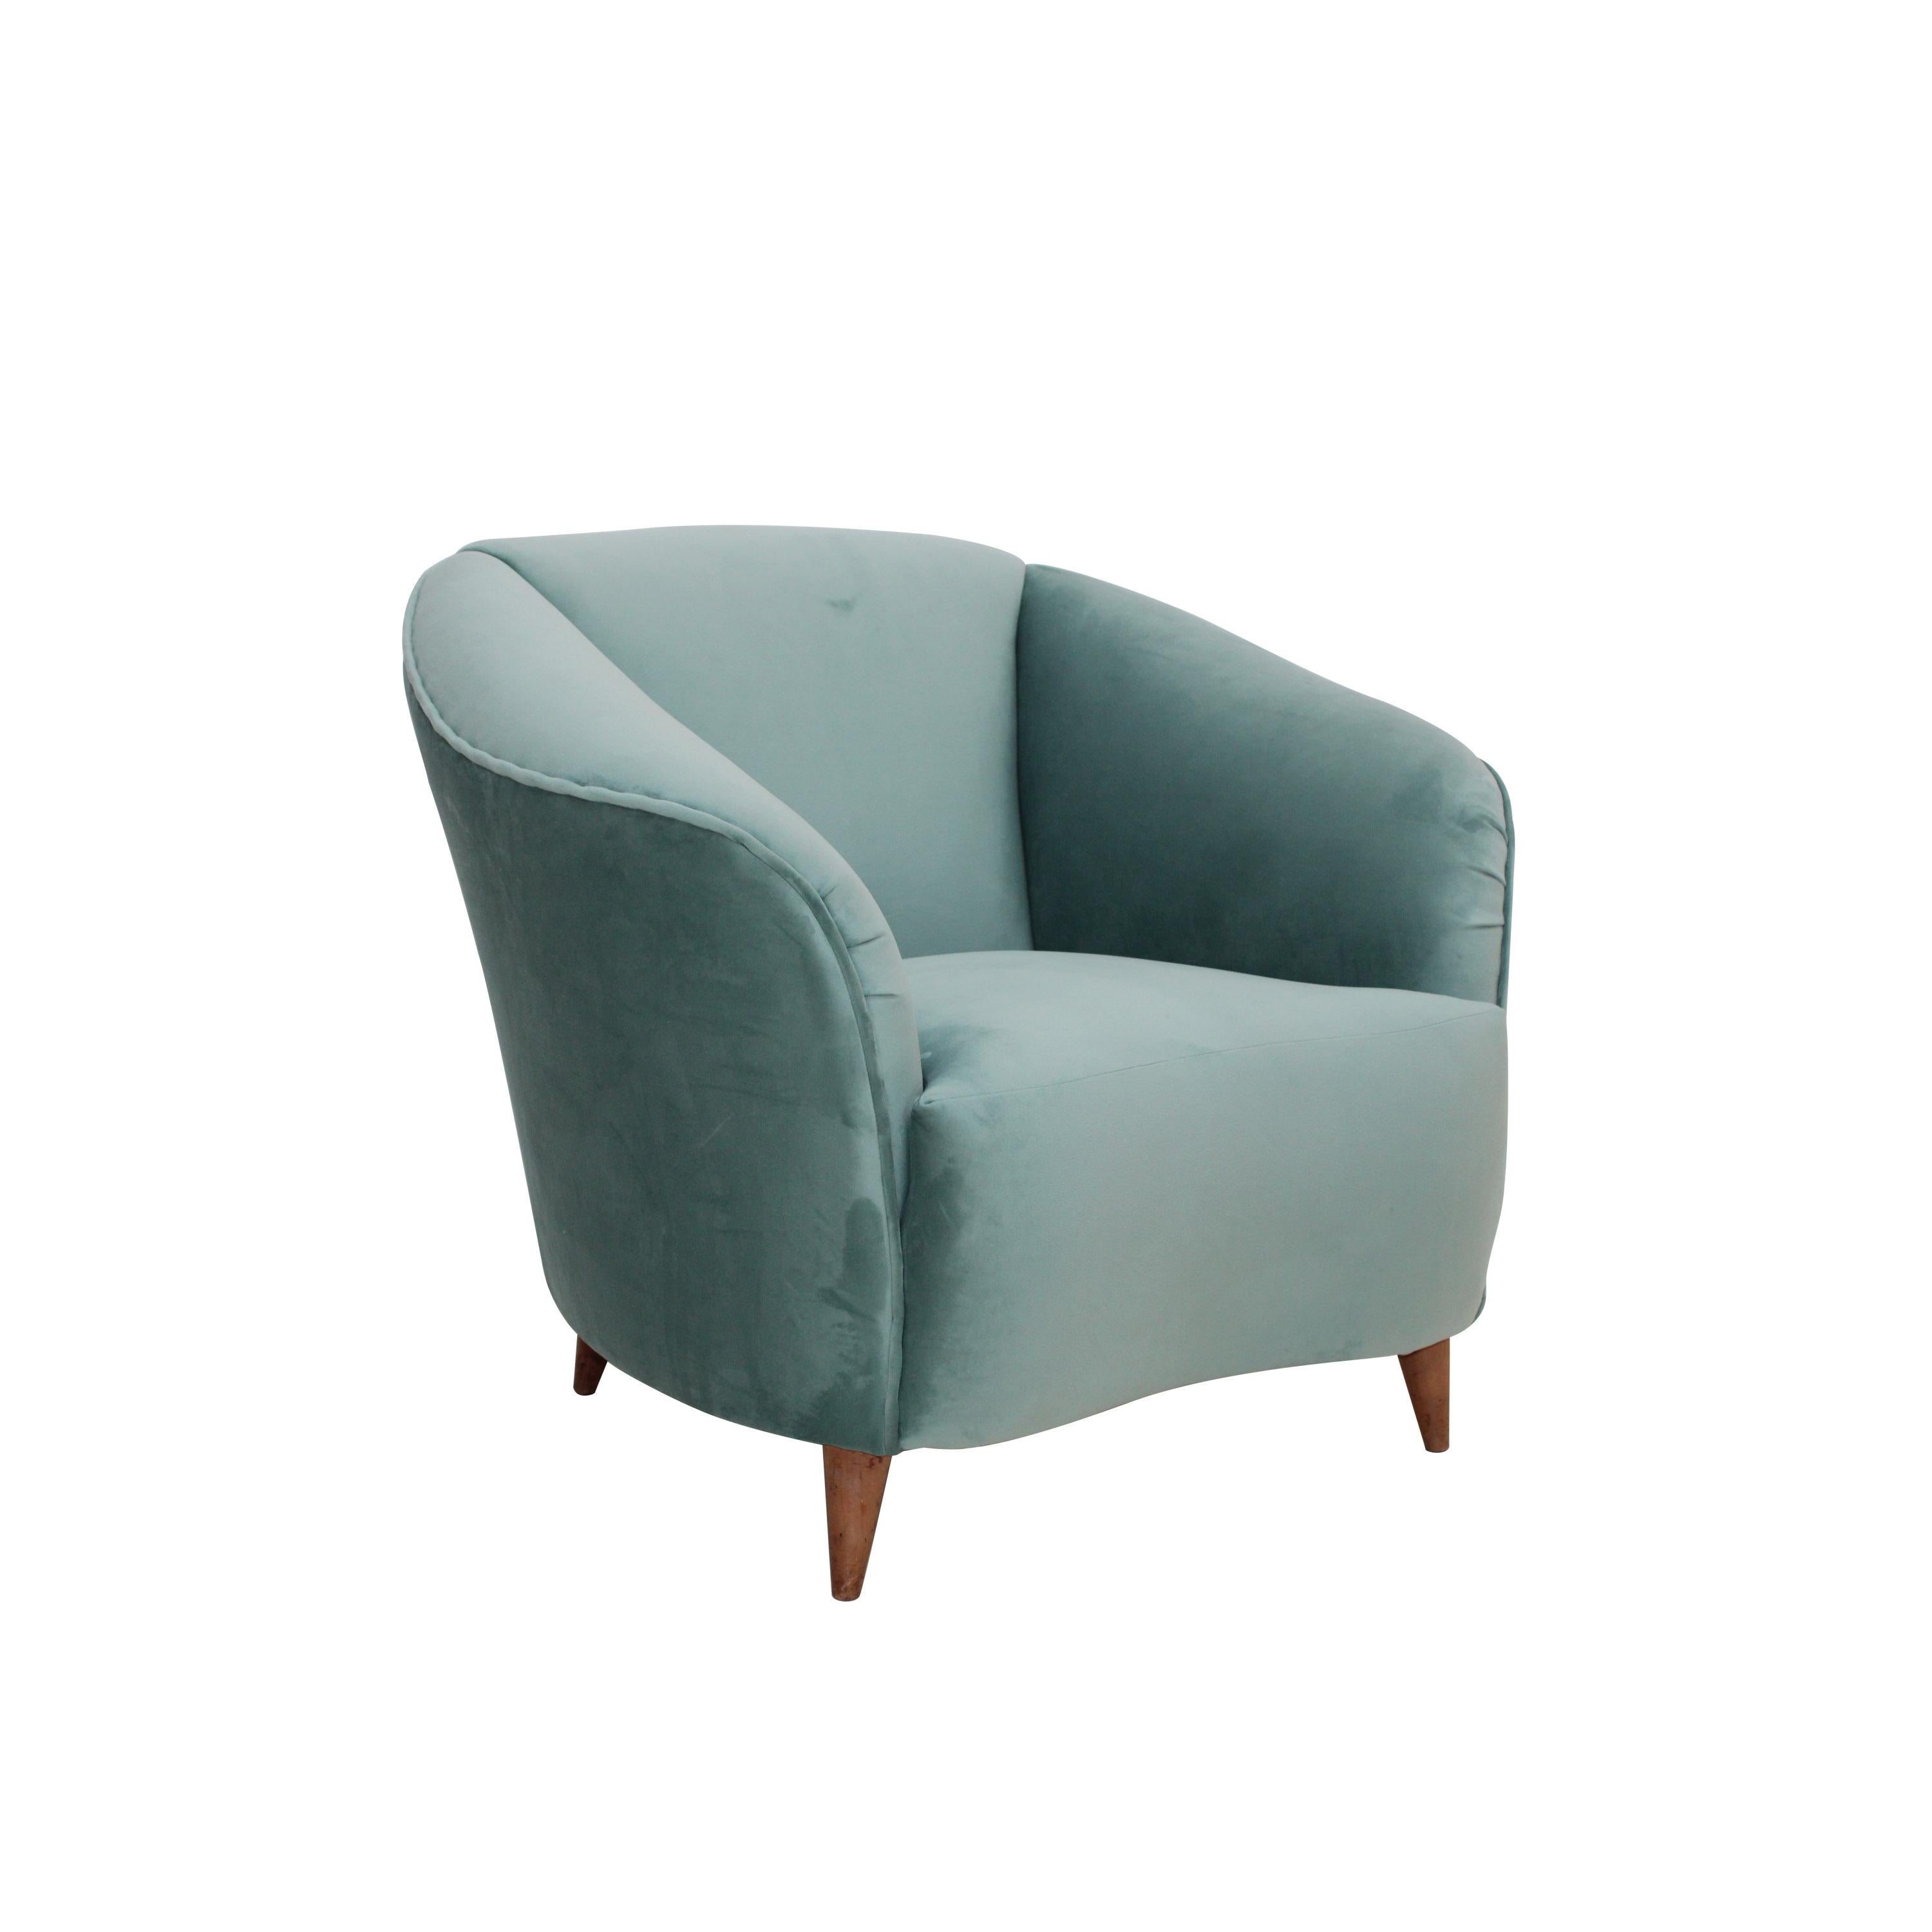 Pair of Mid-Century Modern Italian armchairs made of solid wood structure with padded filling and original springs in the seat and back. Upholstered in aquamarine green velvet.